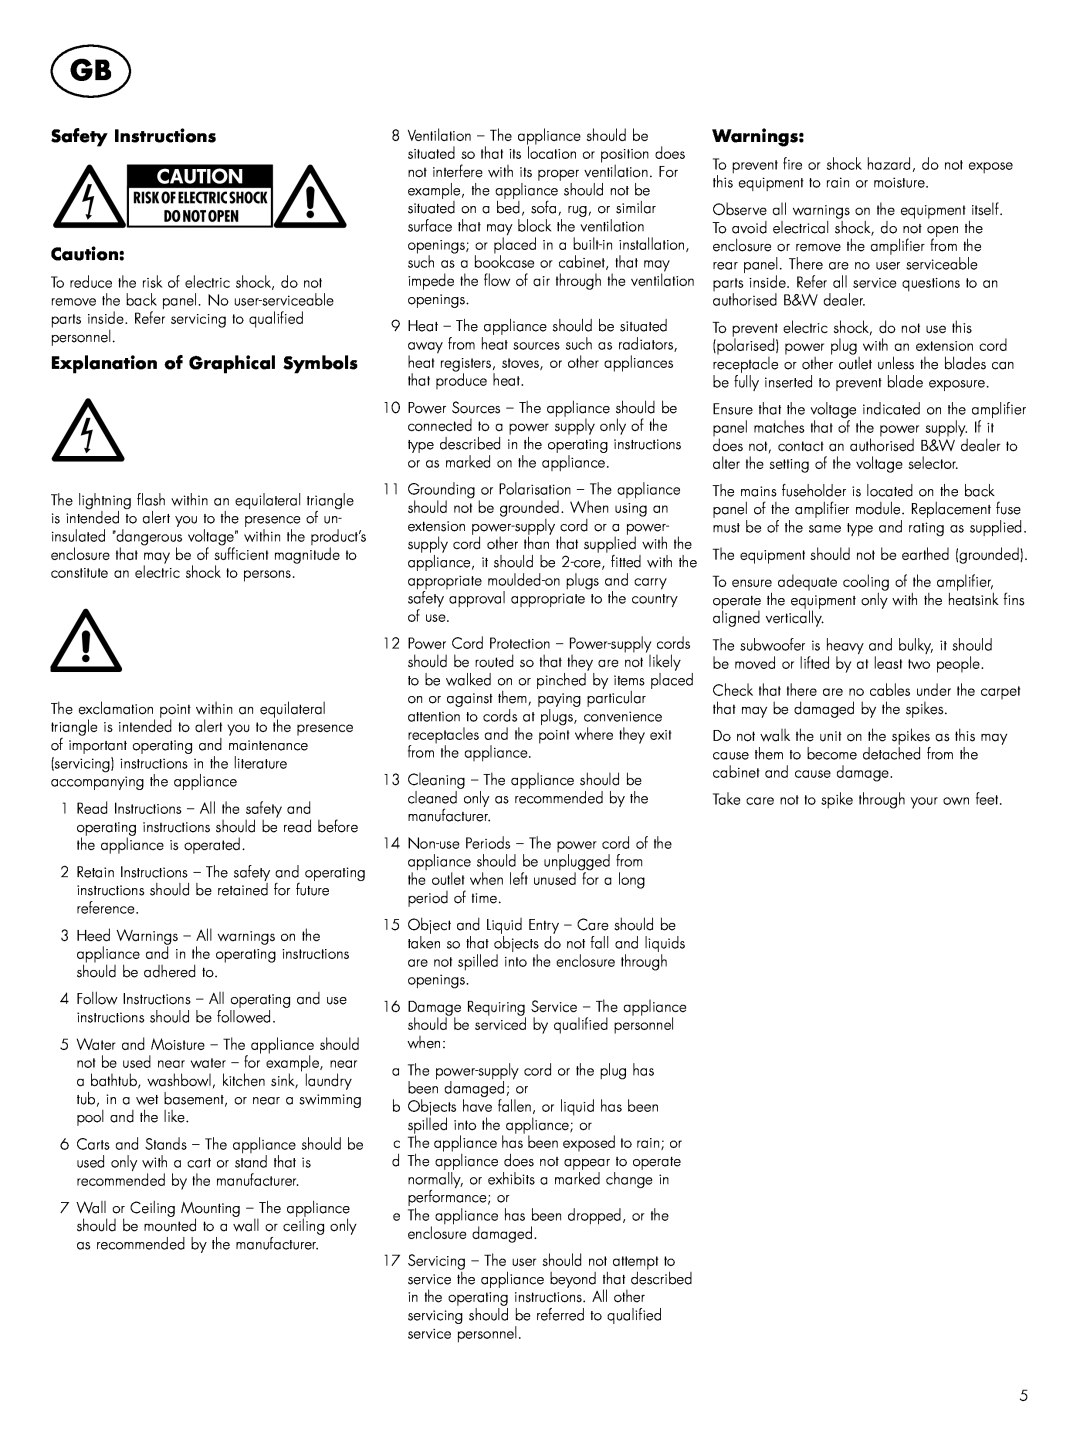 Bowers & Wilkins 4000 owner manual Safety Instructions, Explanation of Graphical Symbols, Warnings 